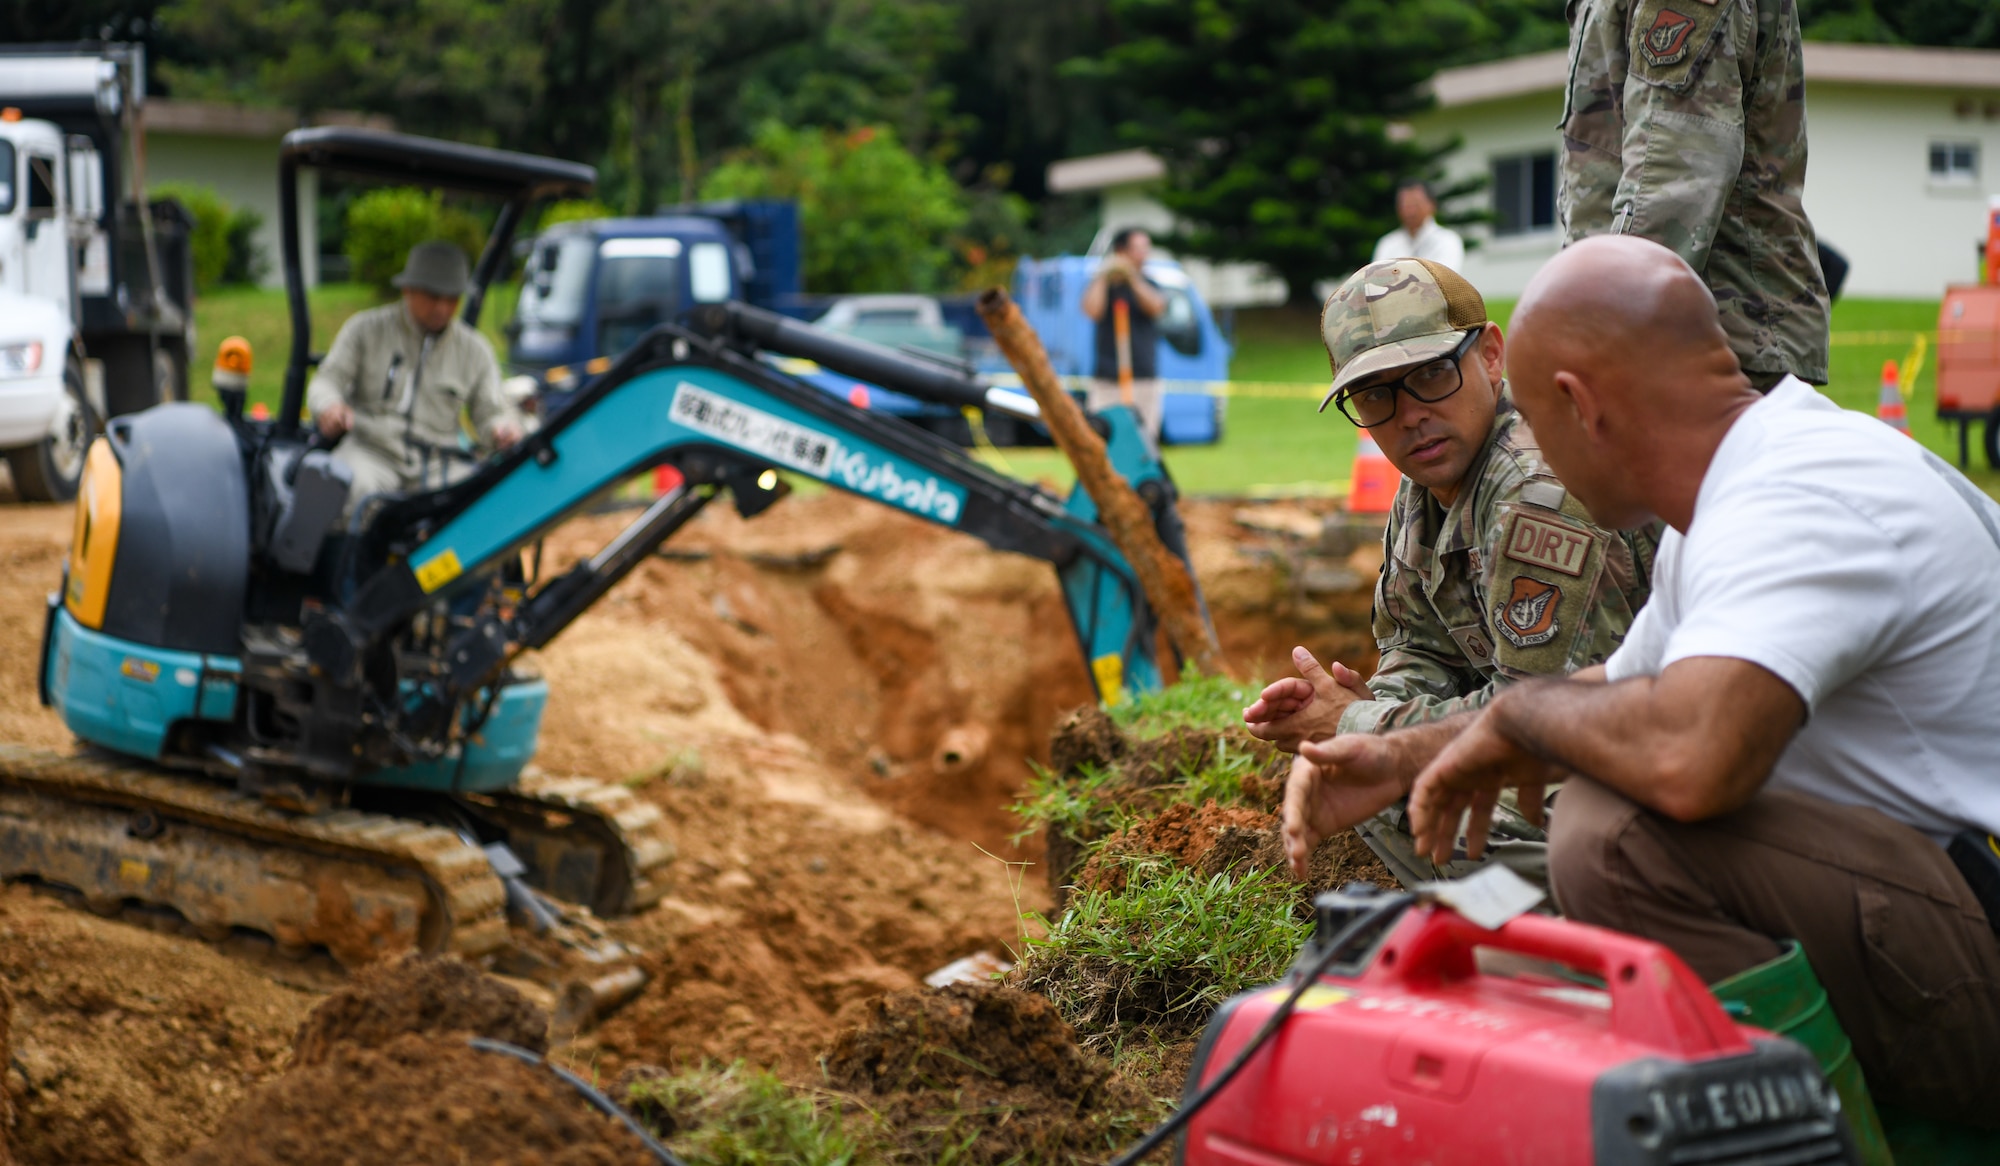 Master labor contractors and U.S. Air Force Airmen discuss and work on an emergency ground repair.